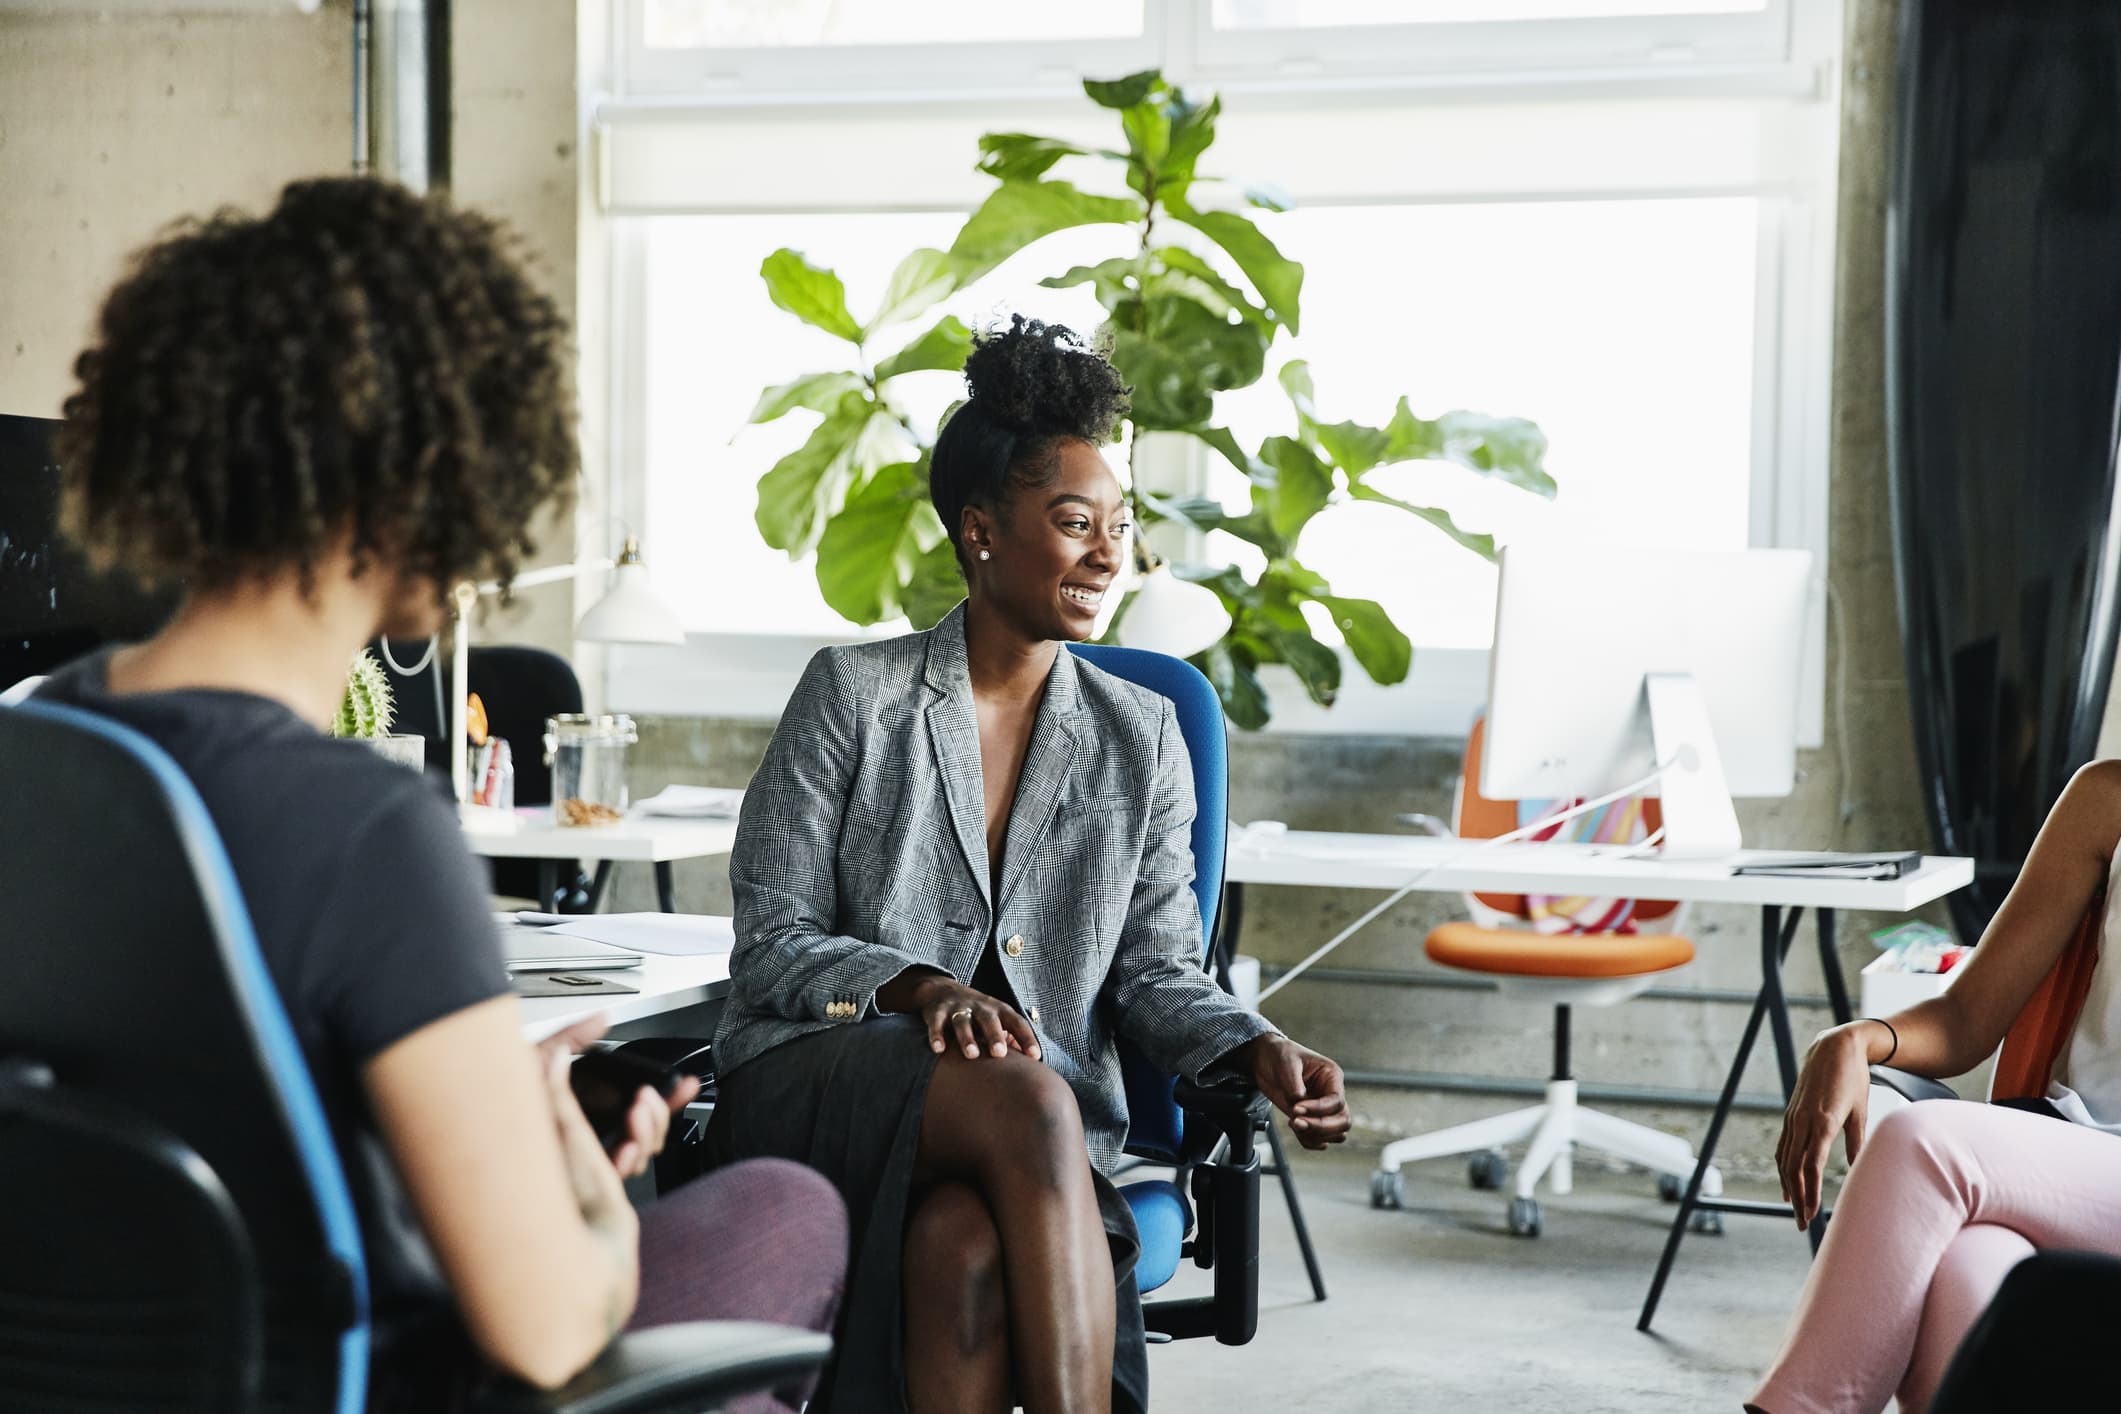 Black women are the fastest-growing group of entrepreneurs in the U.S.